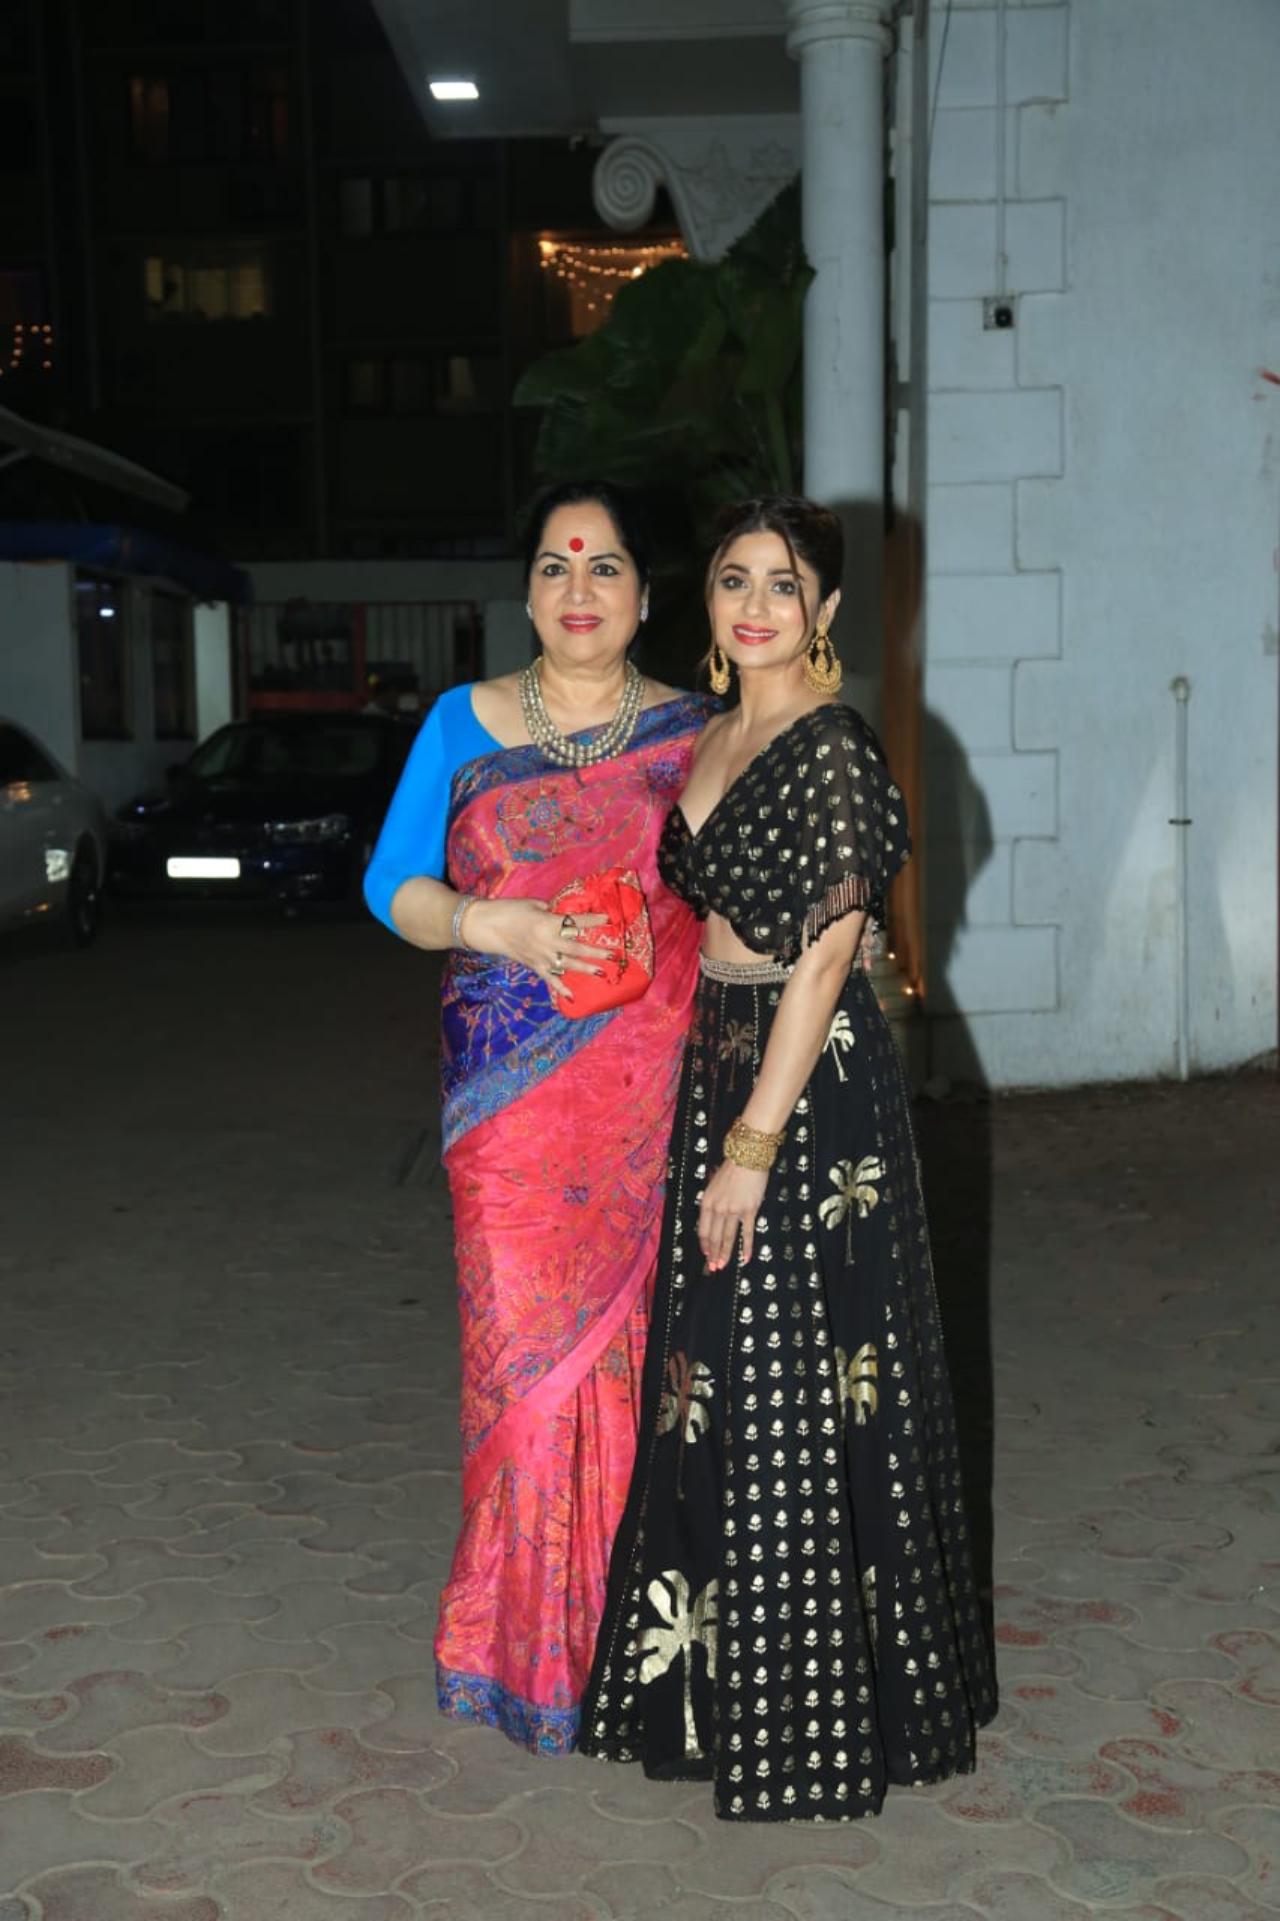 Shamita Shetty glammed up in an all-black lehenga and posed with her mother Sunanda Shetty for sister Shilpa's party